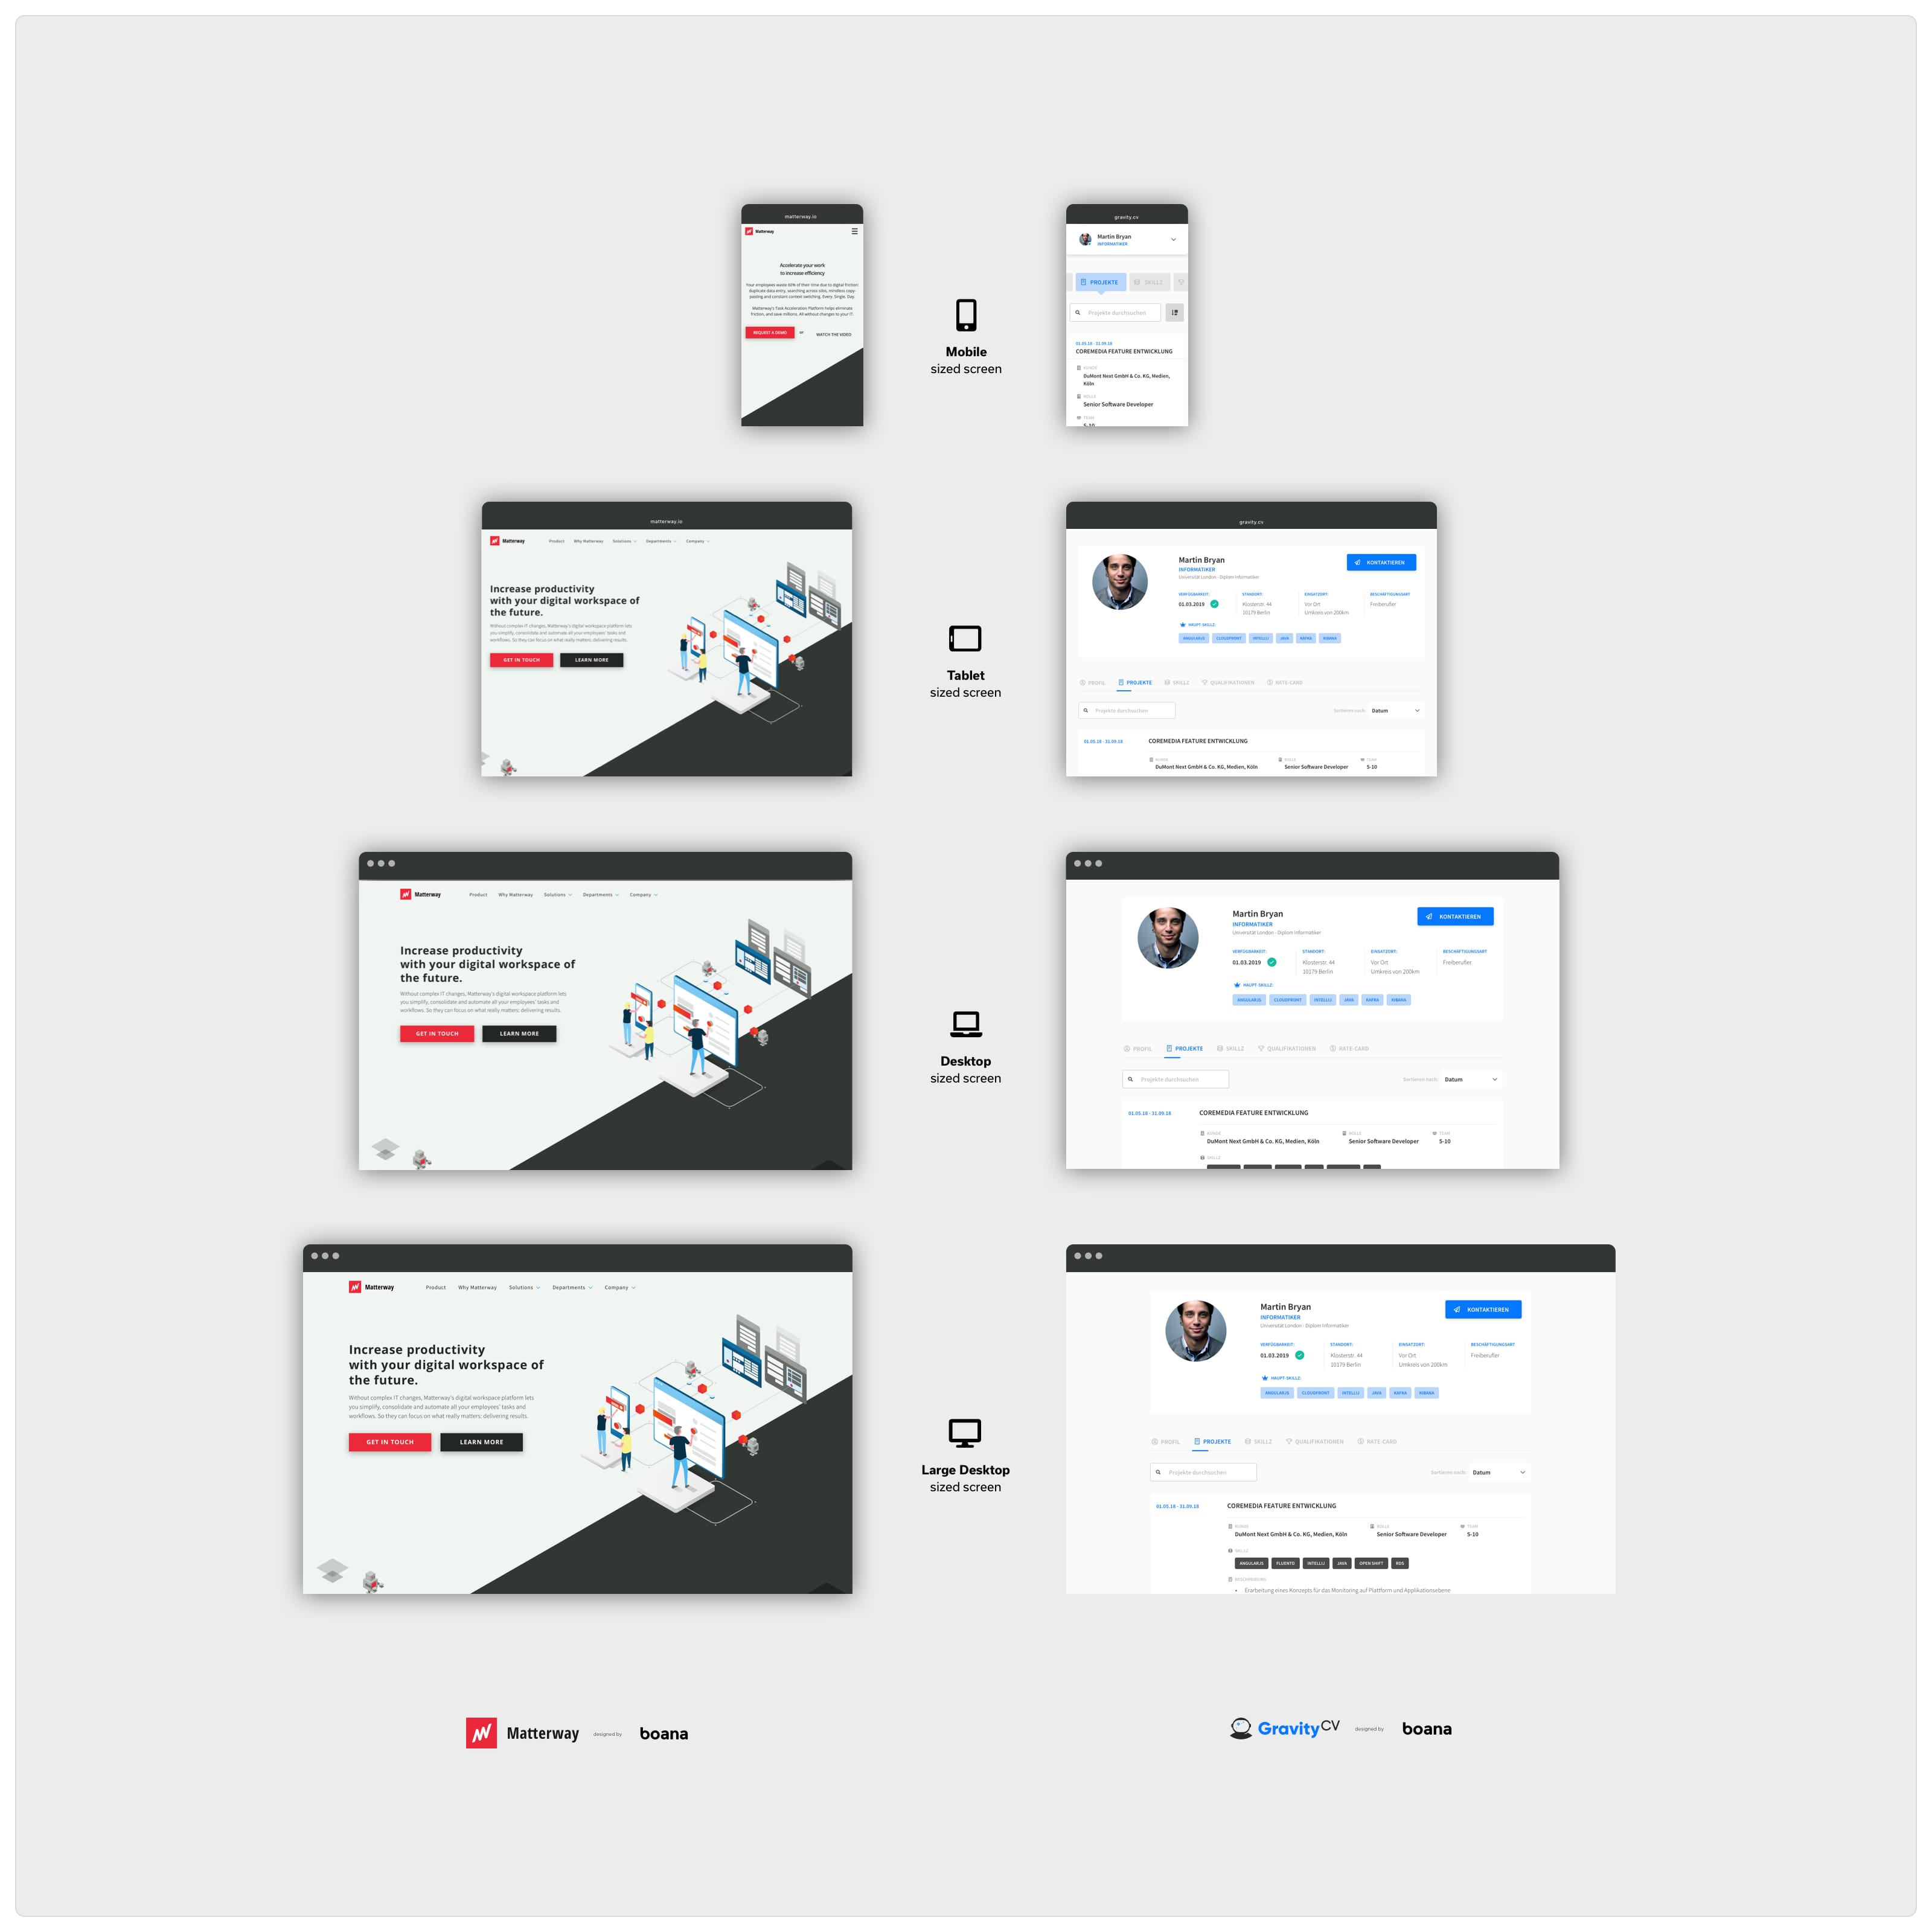 Examples of Responsive Design for a landing page (left) and a digital product (right).